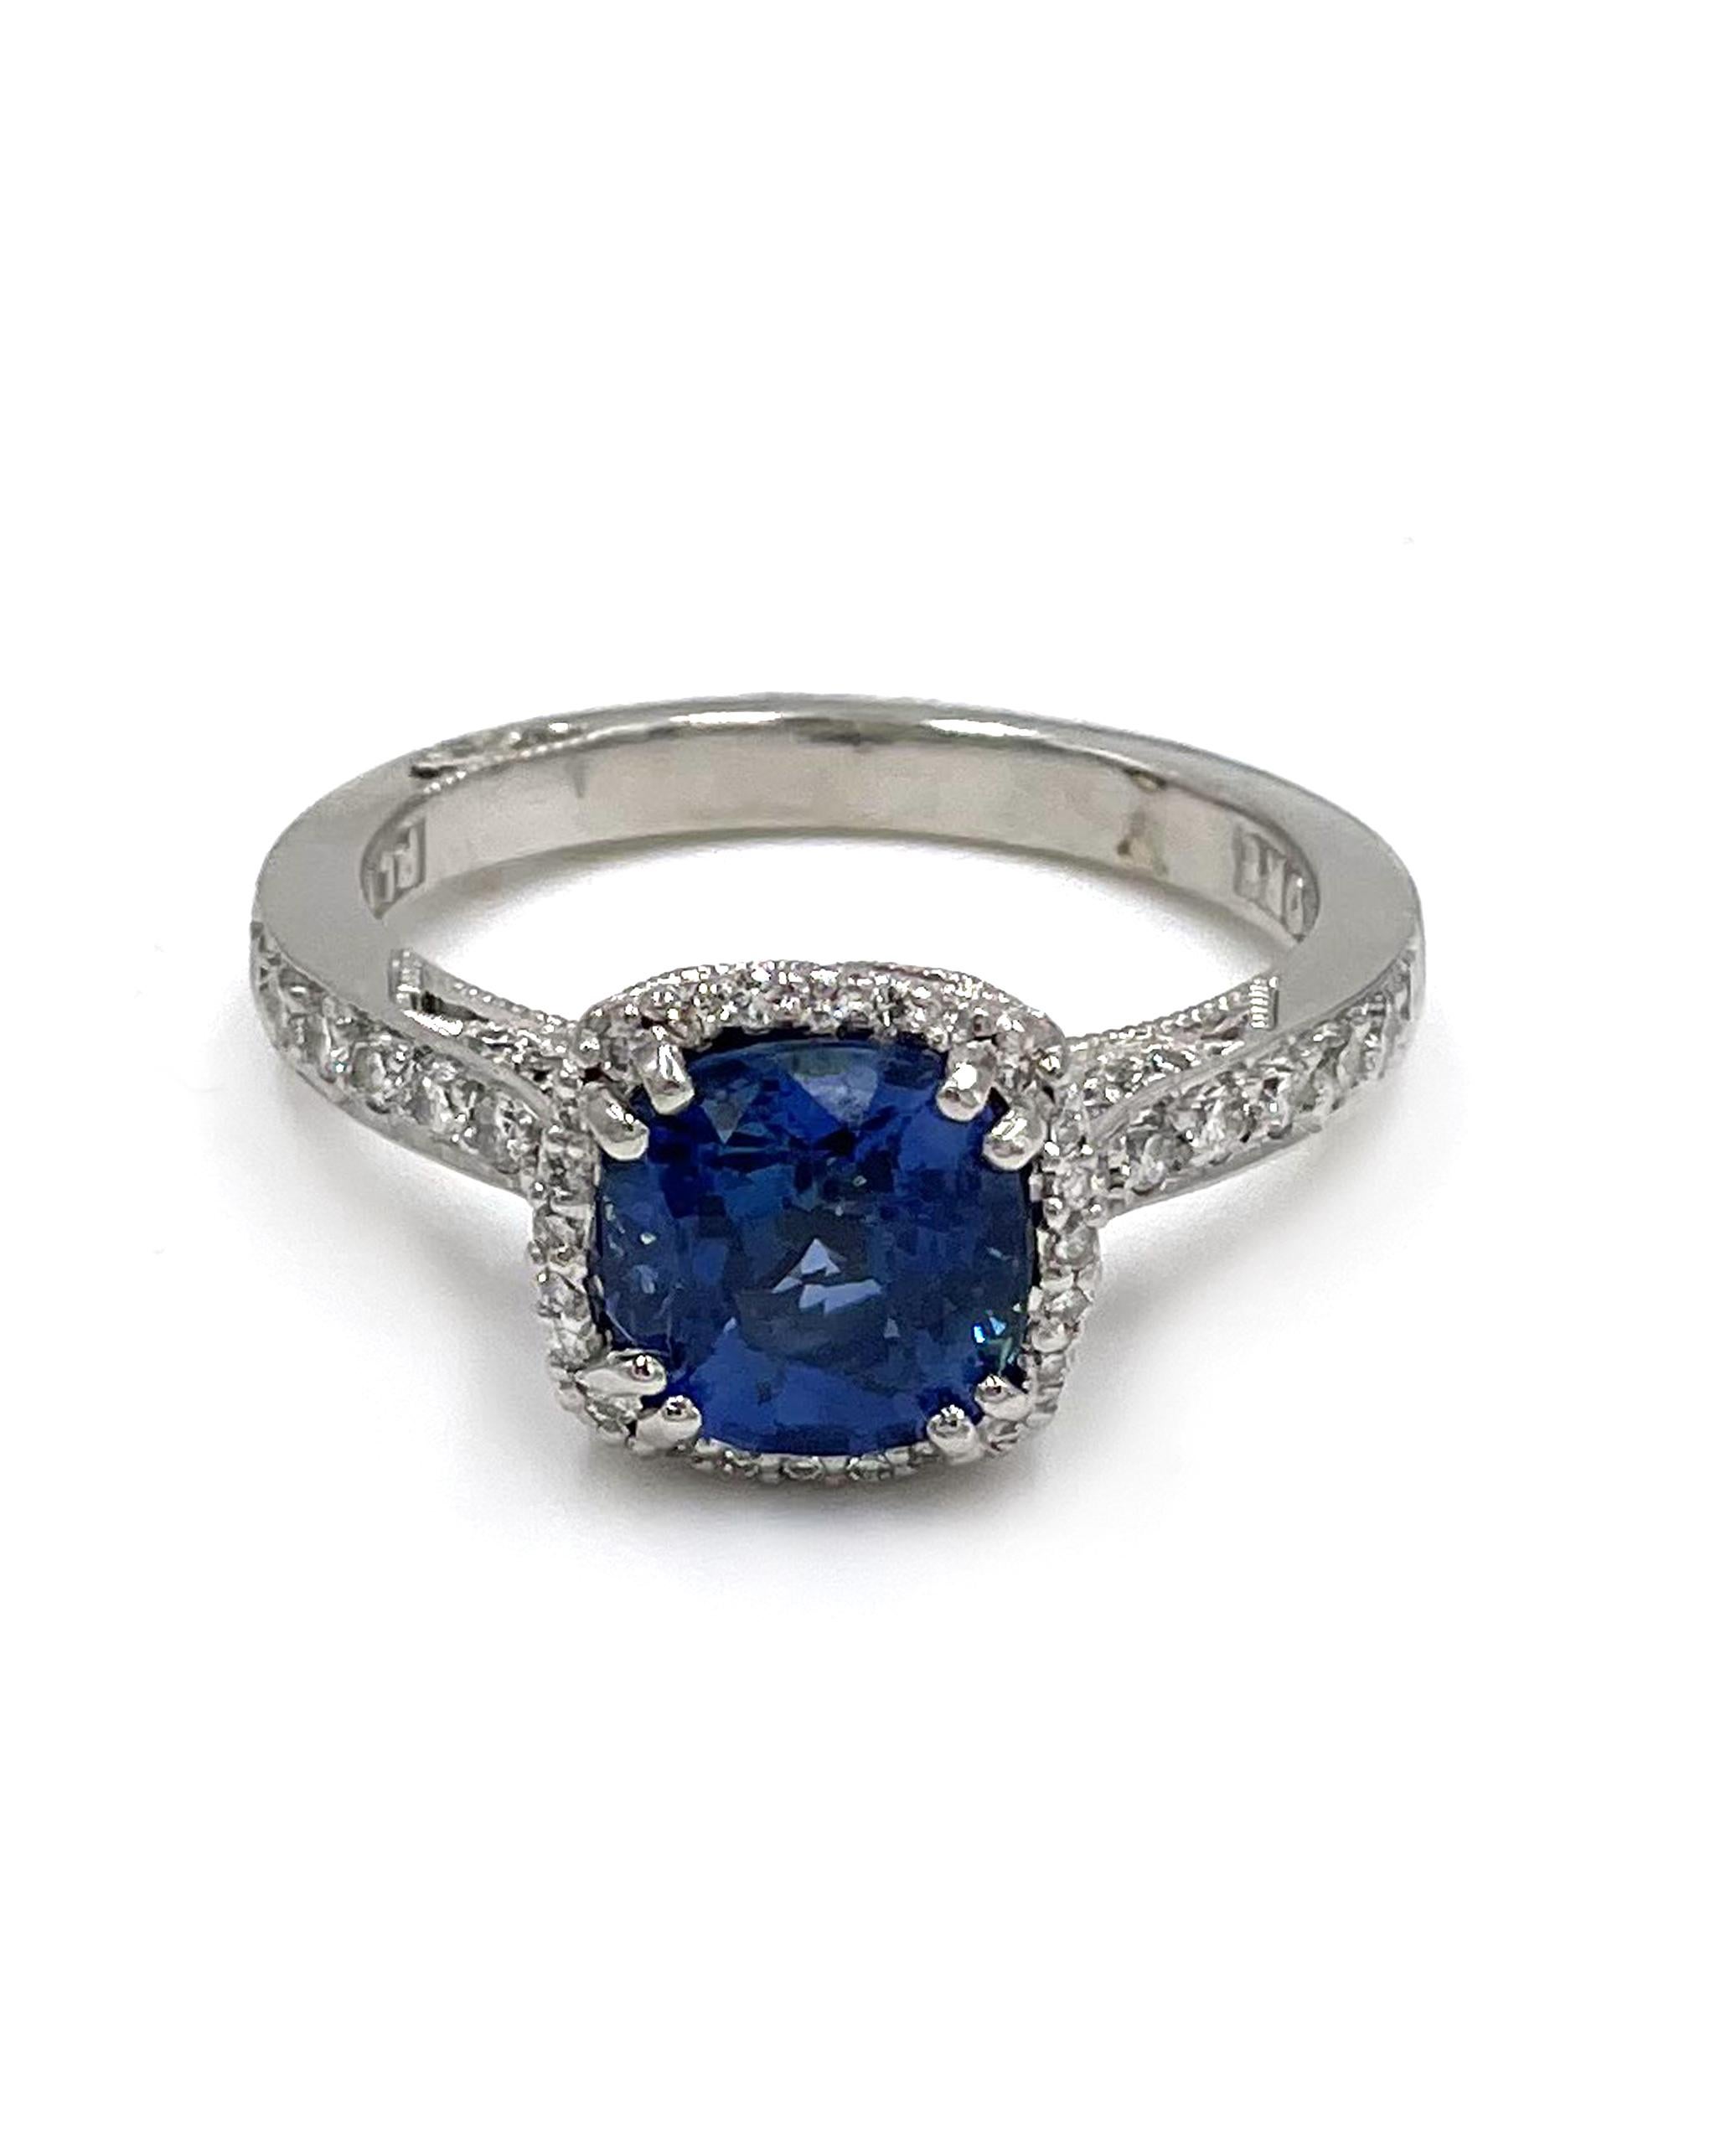 Platinum Tacori Dantela Collection Ring with Diamonds Totaling 0.37 Carats and One Center Round Ceylon Color Blue Sapphire Totaling 2.18 Carats.

-Style no. 2620RDLGP
- Finger size 6
- Comes with original box and authenticity card
